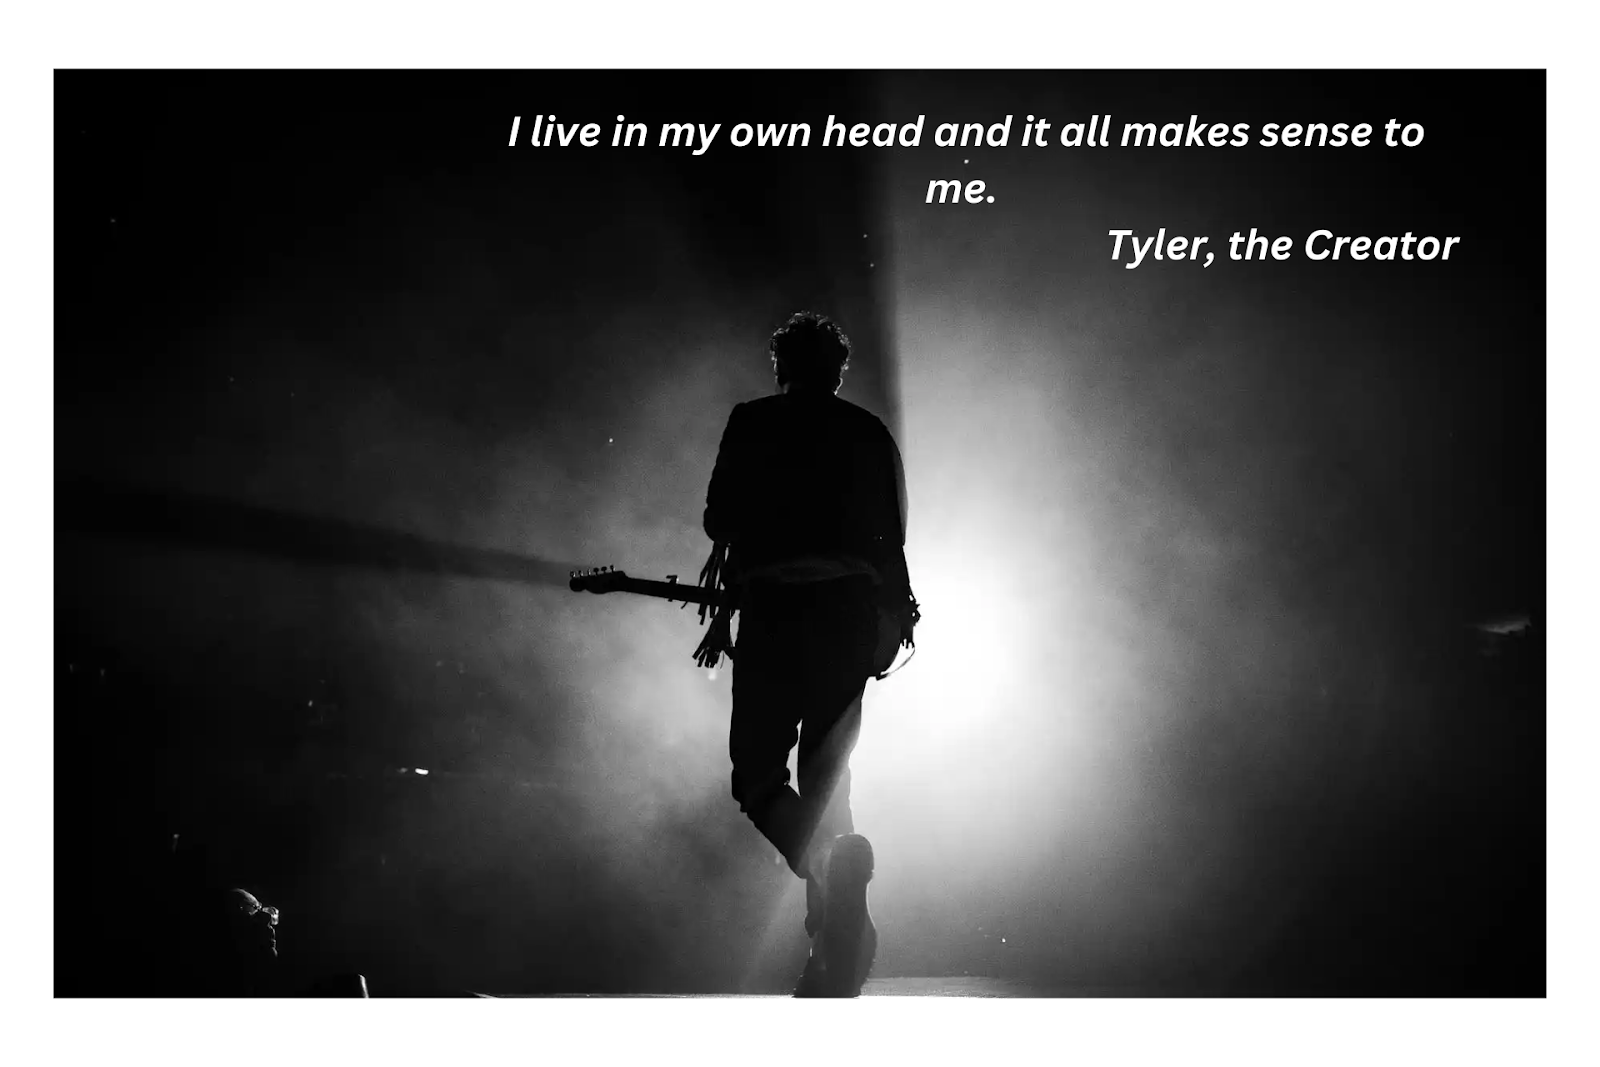 Tyler, the Creator Coming on the Stage for His Concert & His Quote is in the Picture Background